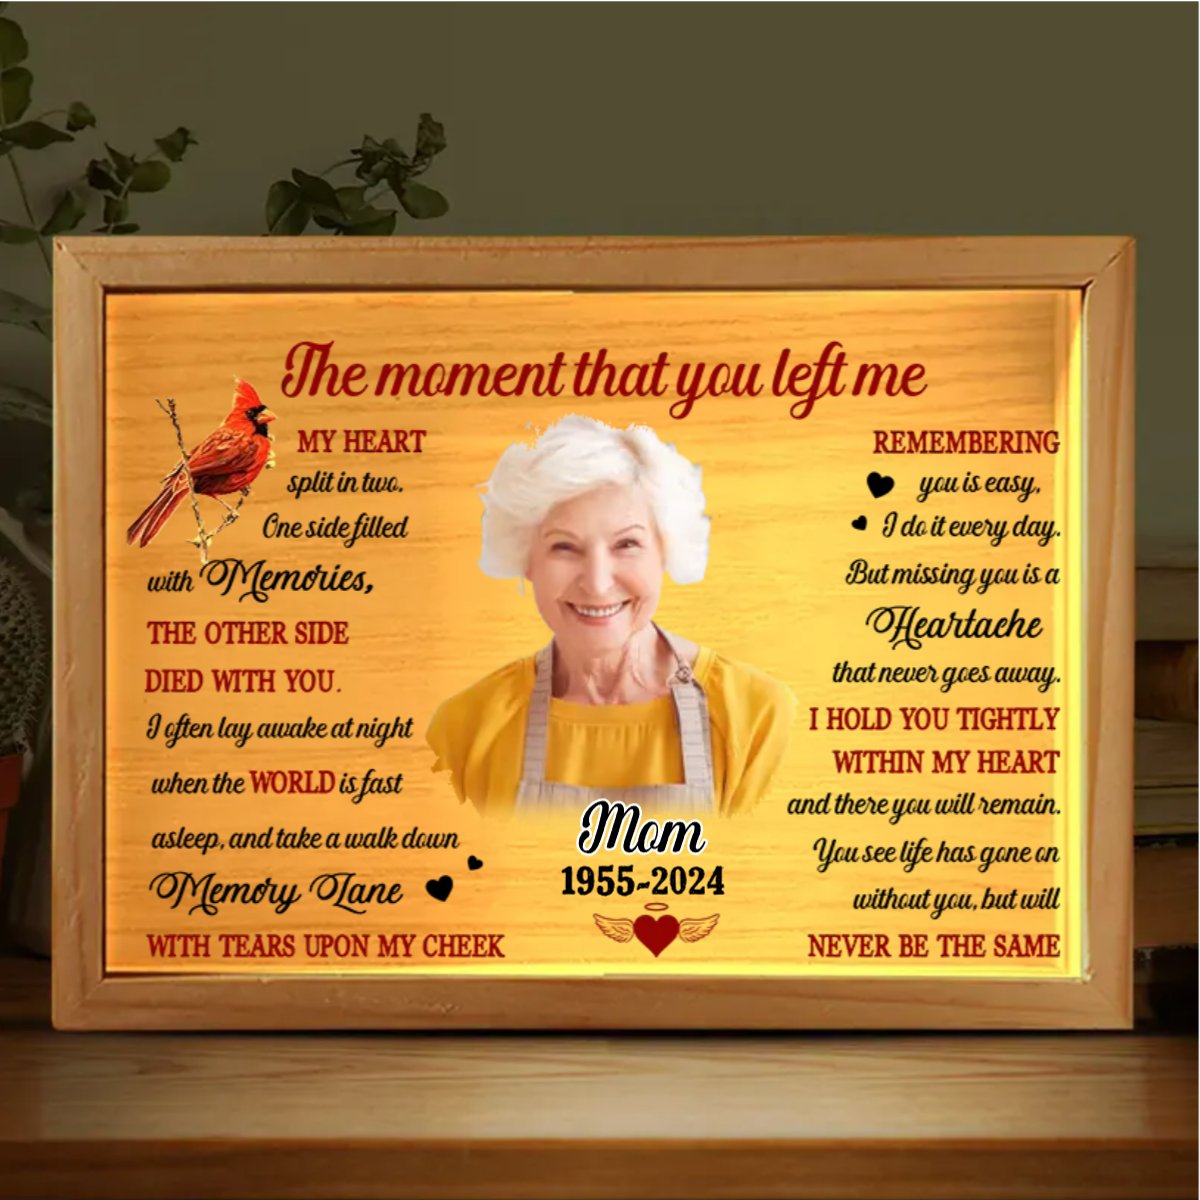 Family - The Moment That You Left Me - Personalized Frame Light Box (NV) - The Next Custom Gift